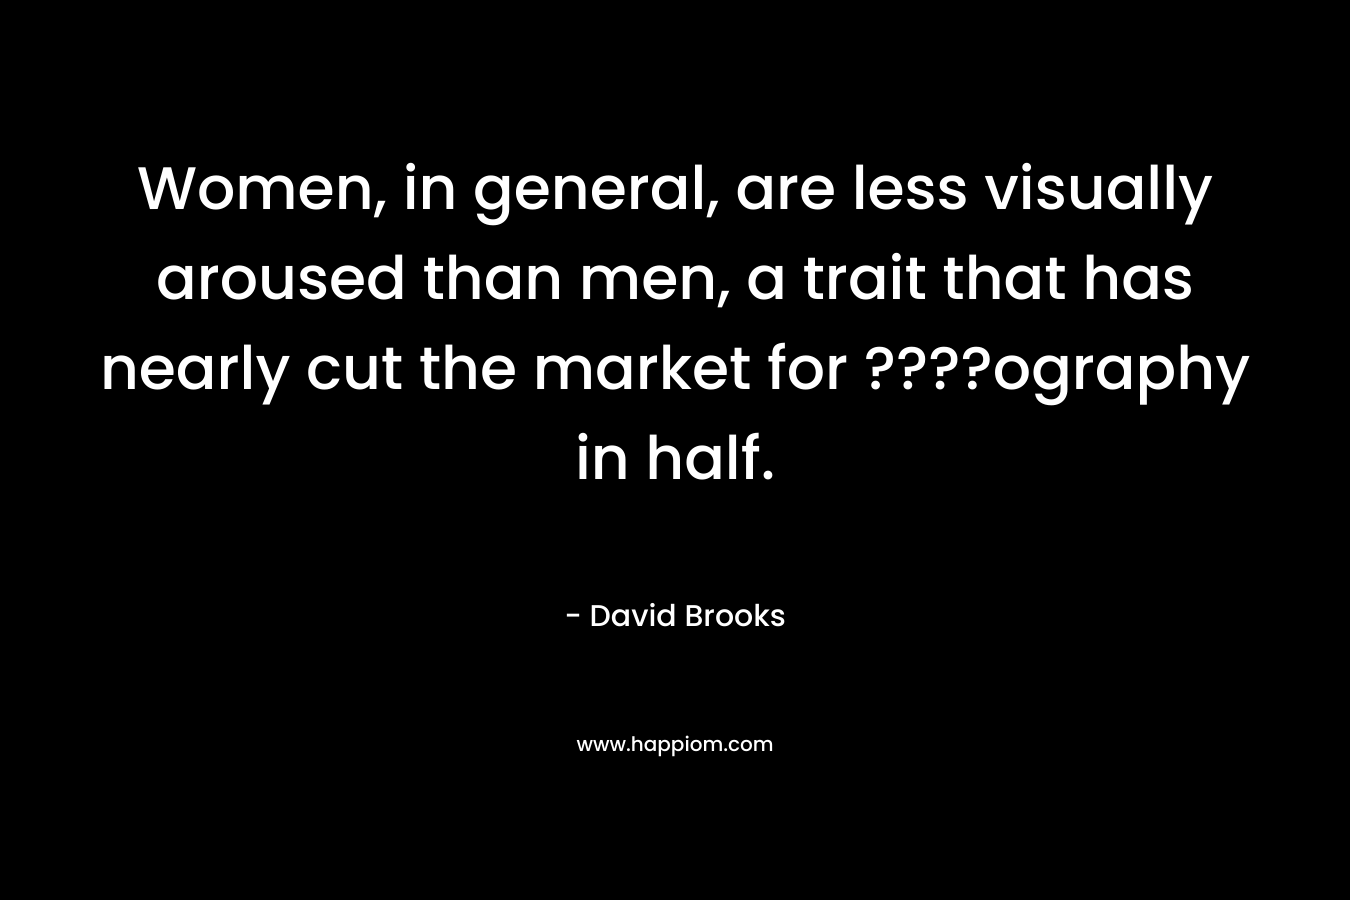 Women, in general, are less visually aroused than men, a trait that has nearly cut the market for ????ography in half.